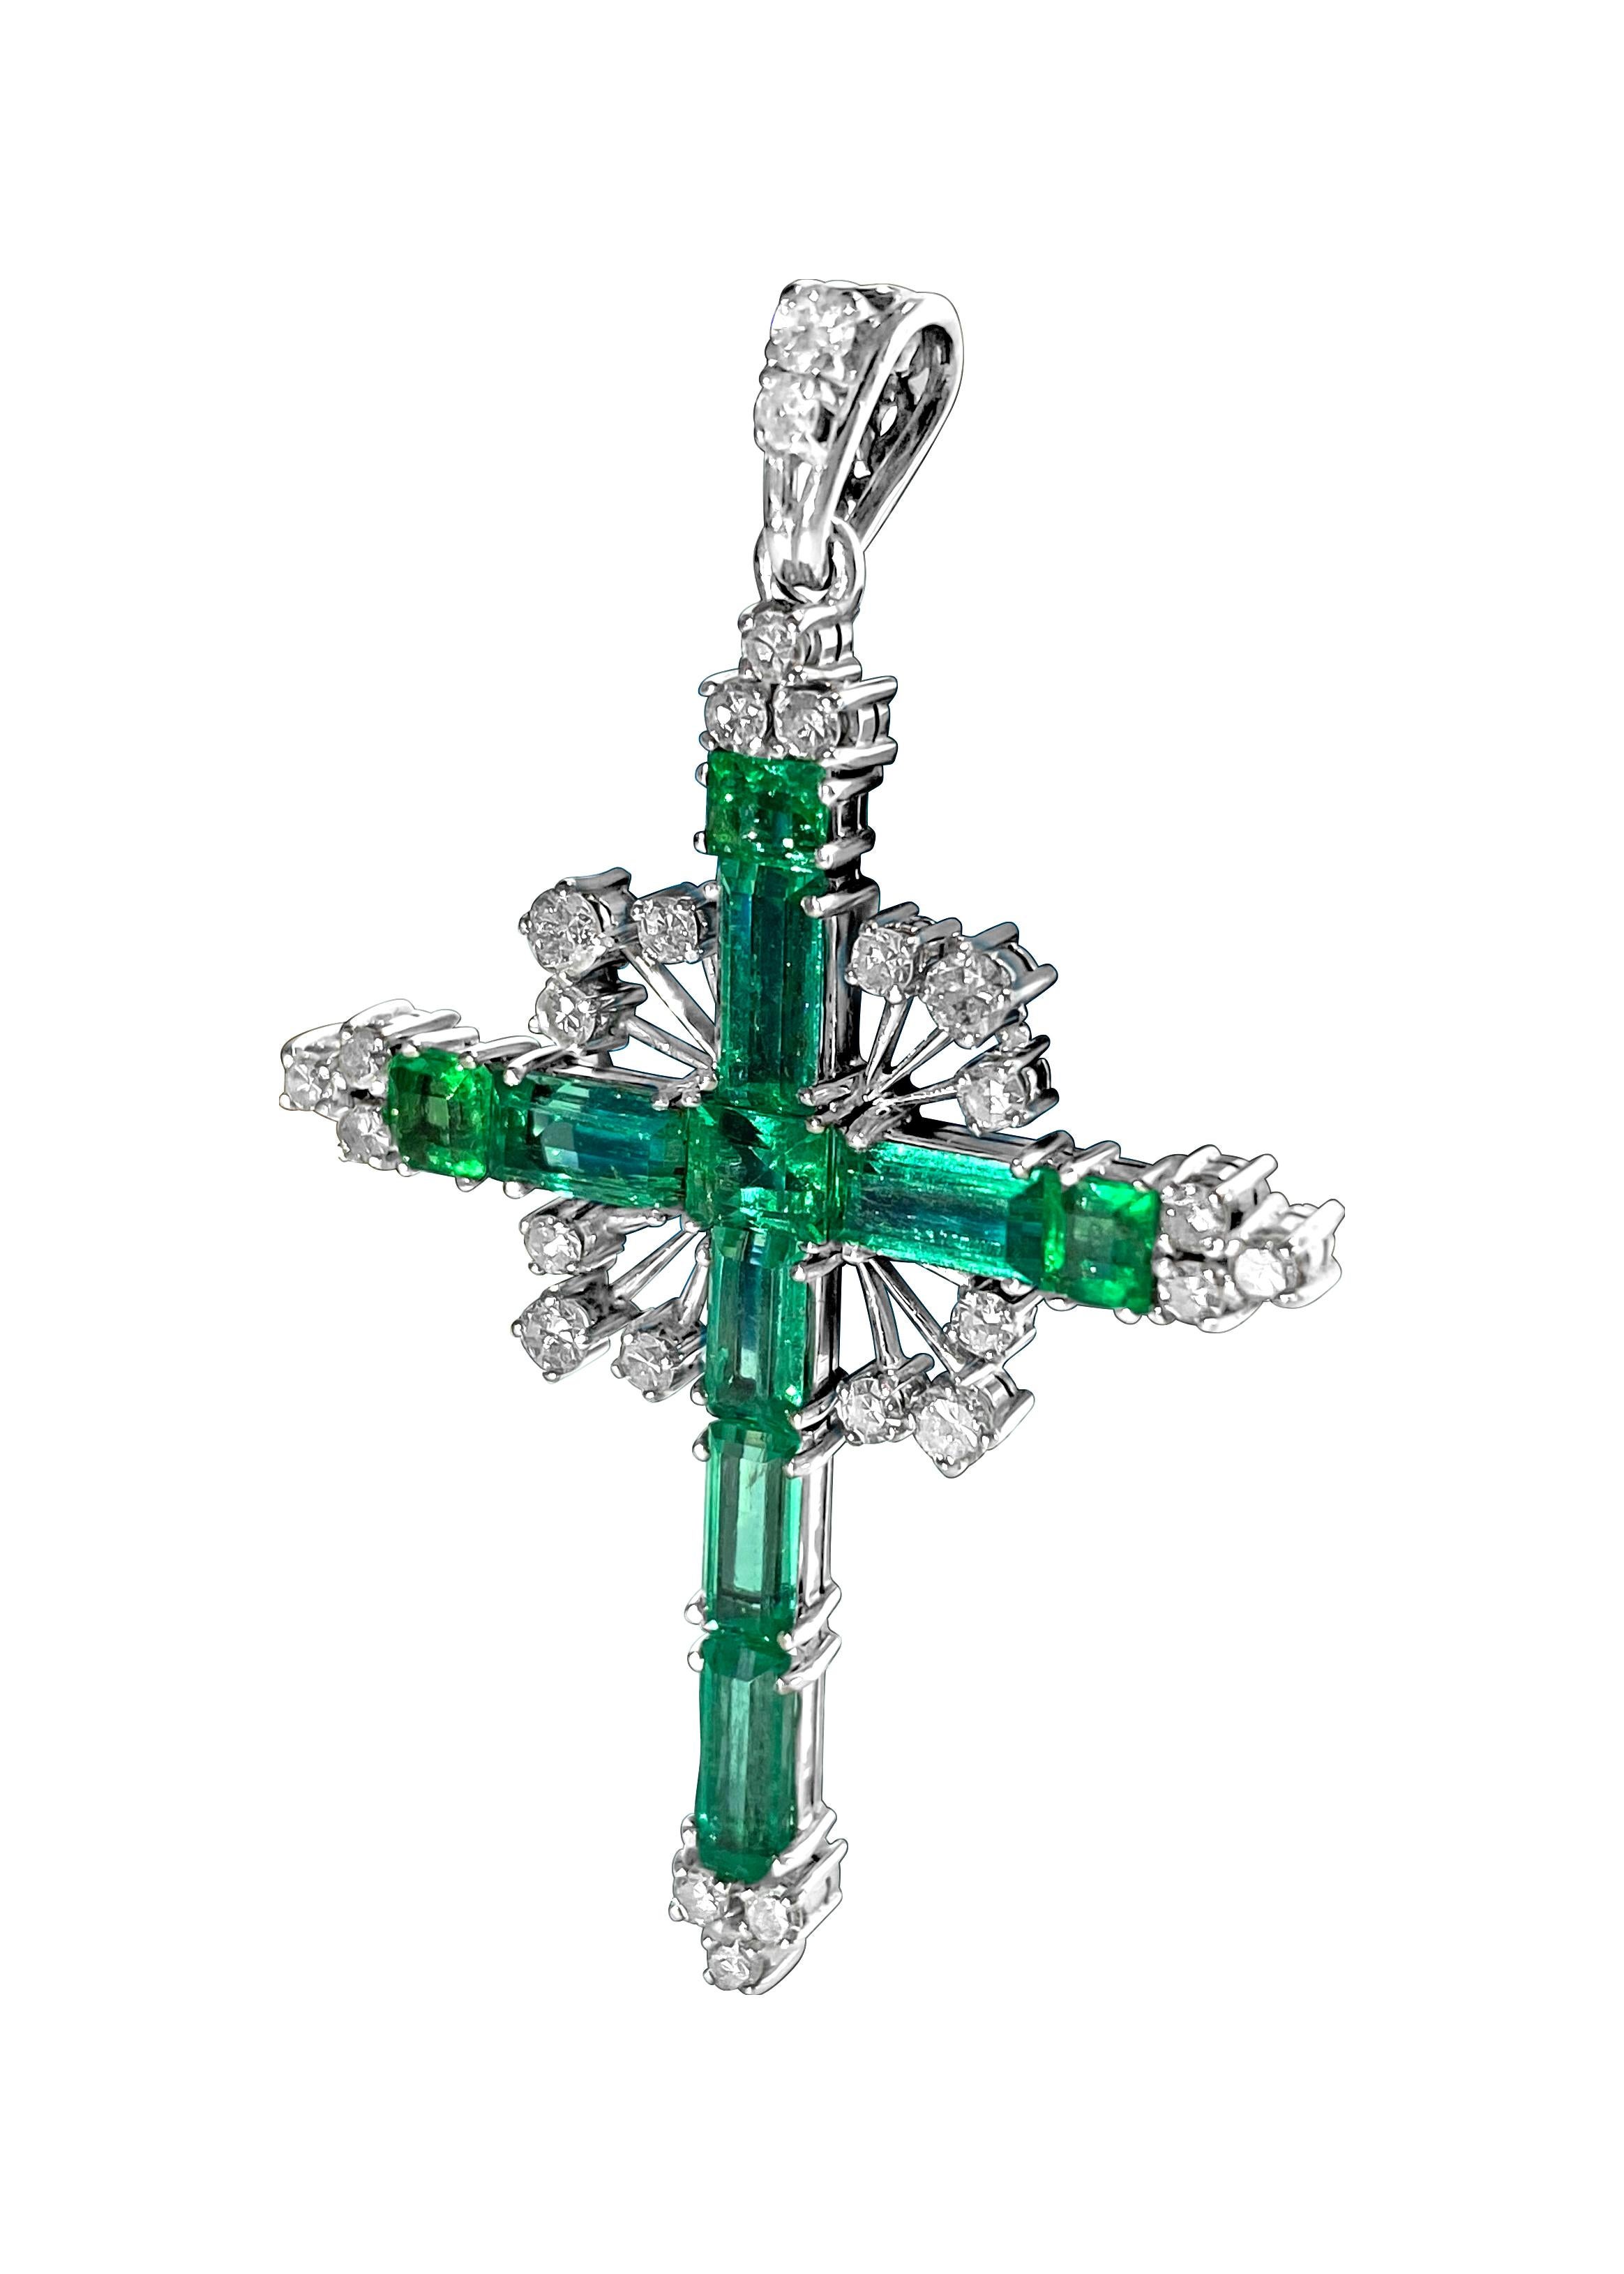 A beautiful necklace made of 18-karat white gold with a big green emerald that weighs 12.50 carats. The emerald is completely natural and comes from the earth. There are also 1.50 carats of diamonds in the necklace, which are very clear (VS-SI